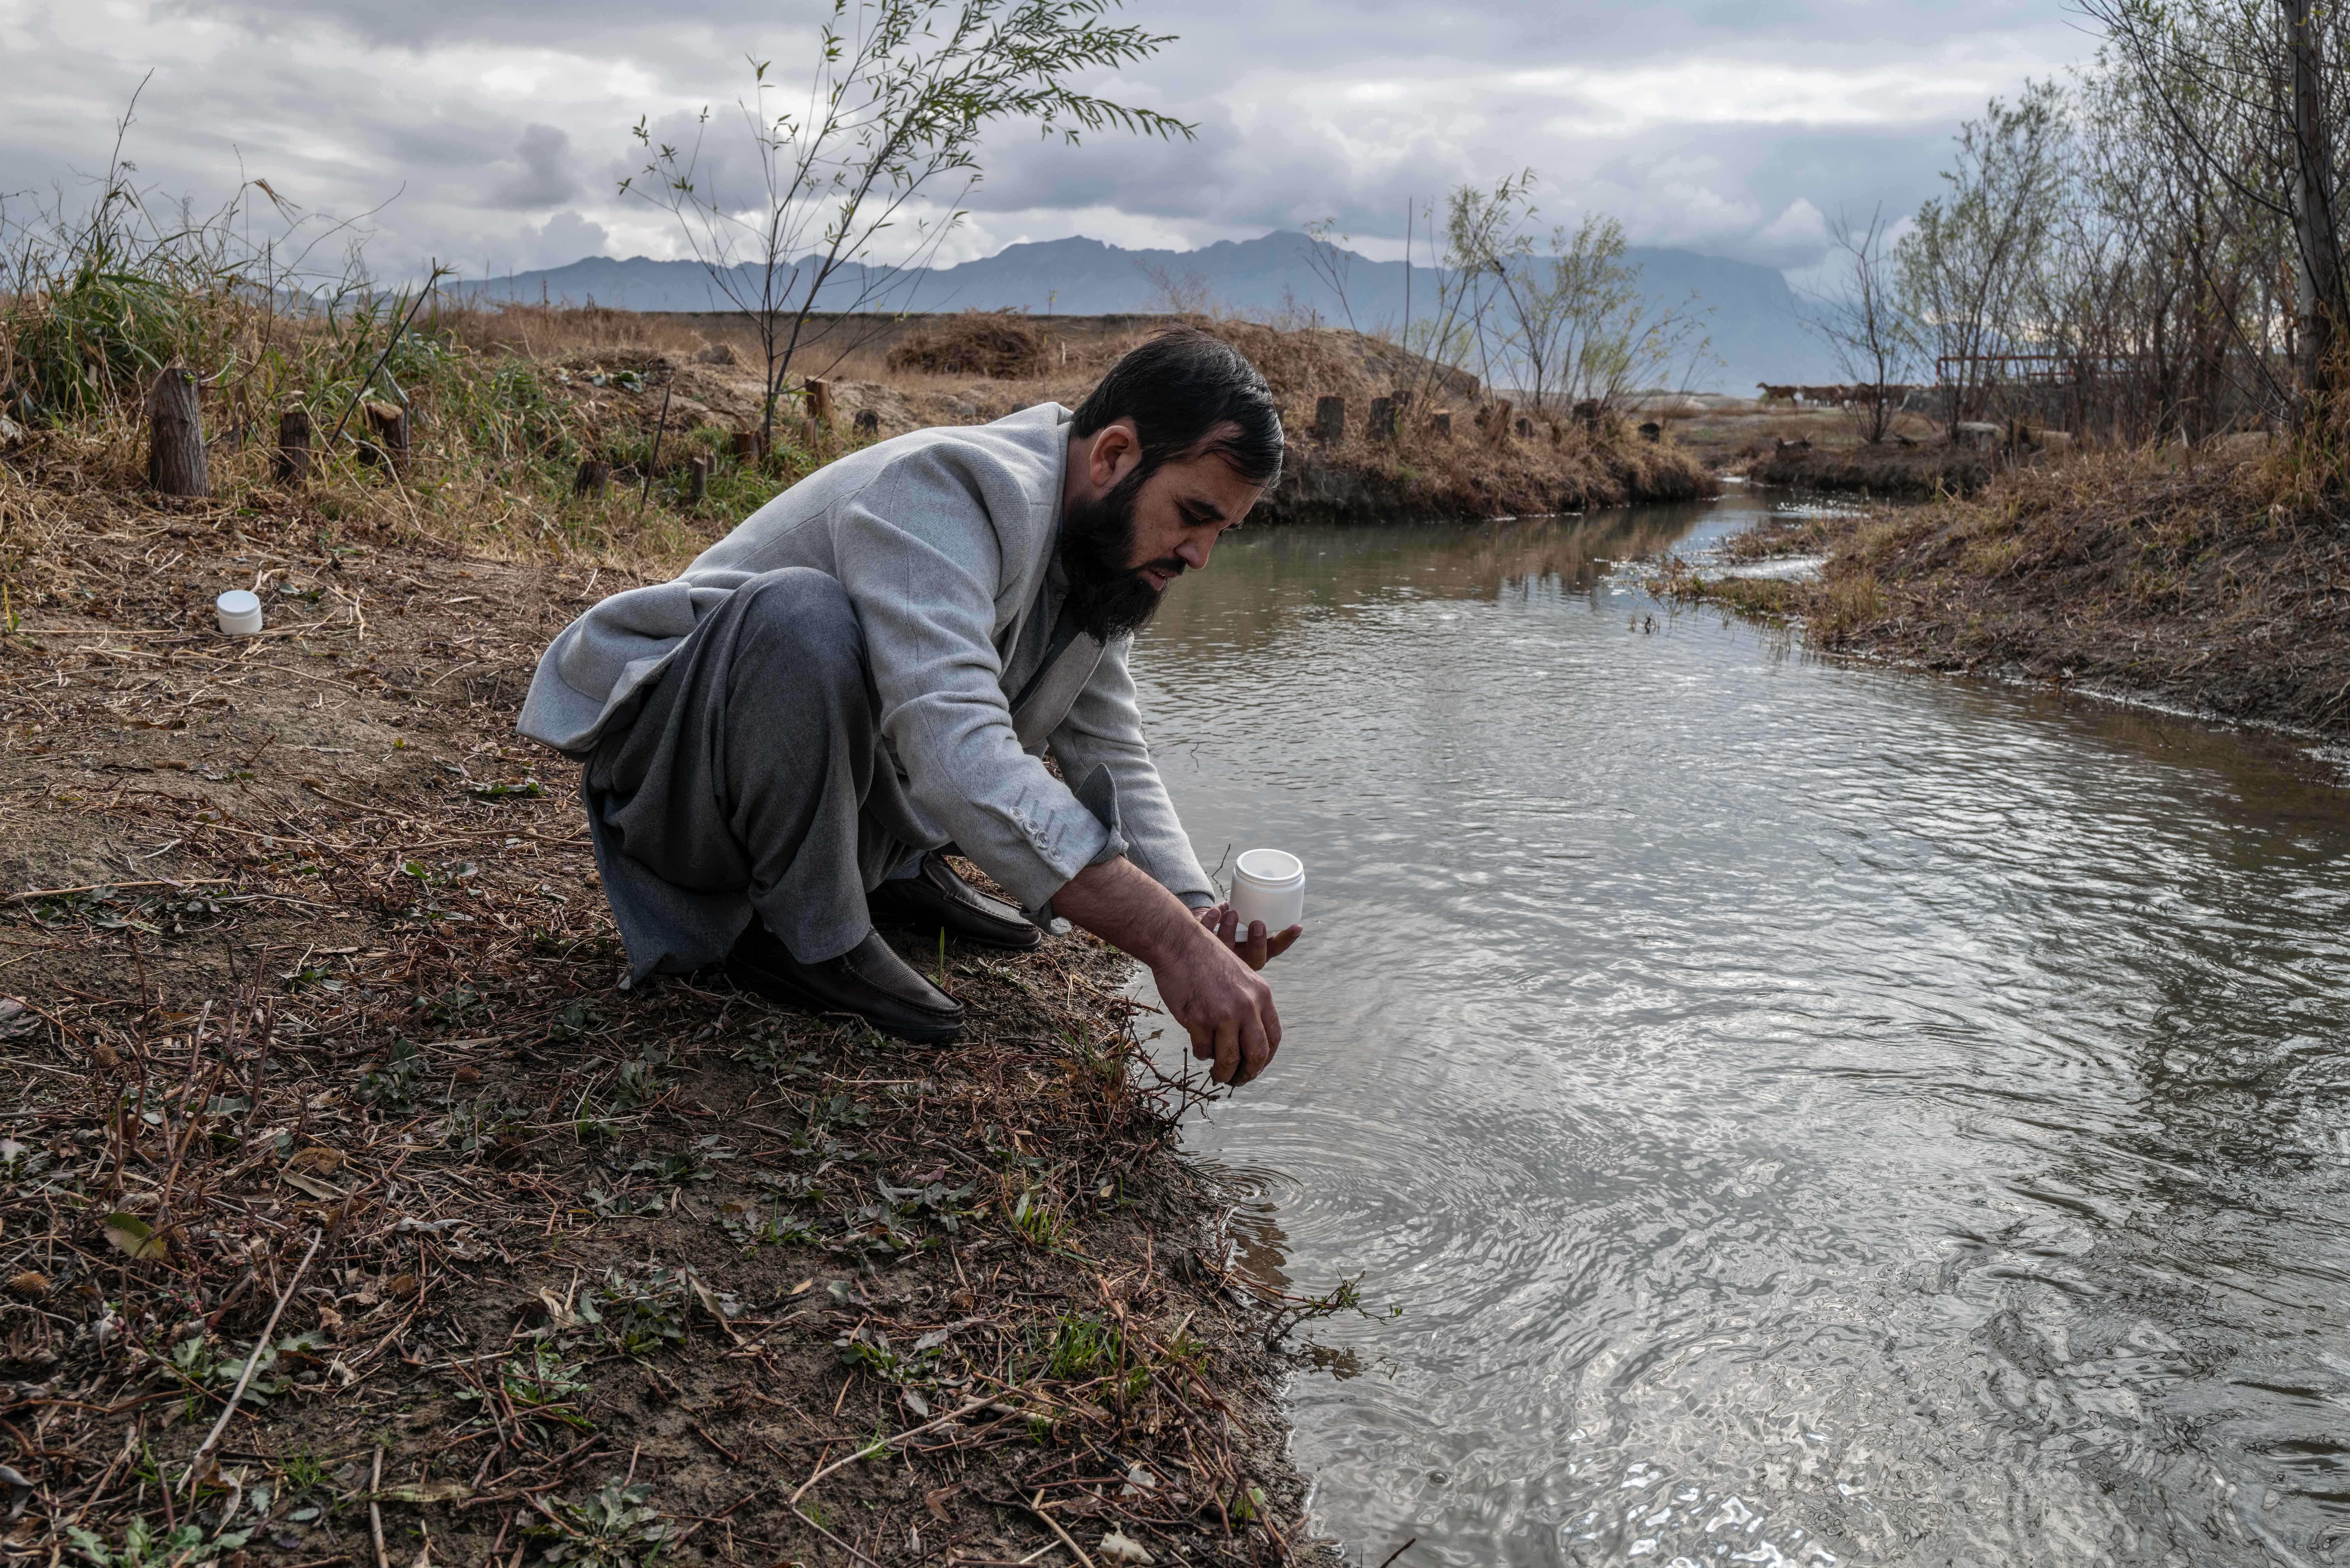 War in Afghanistan devastated the country's environment in ways